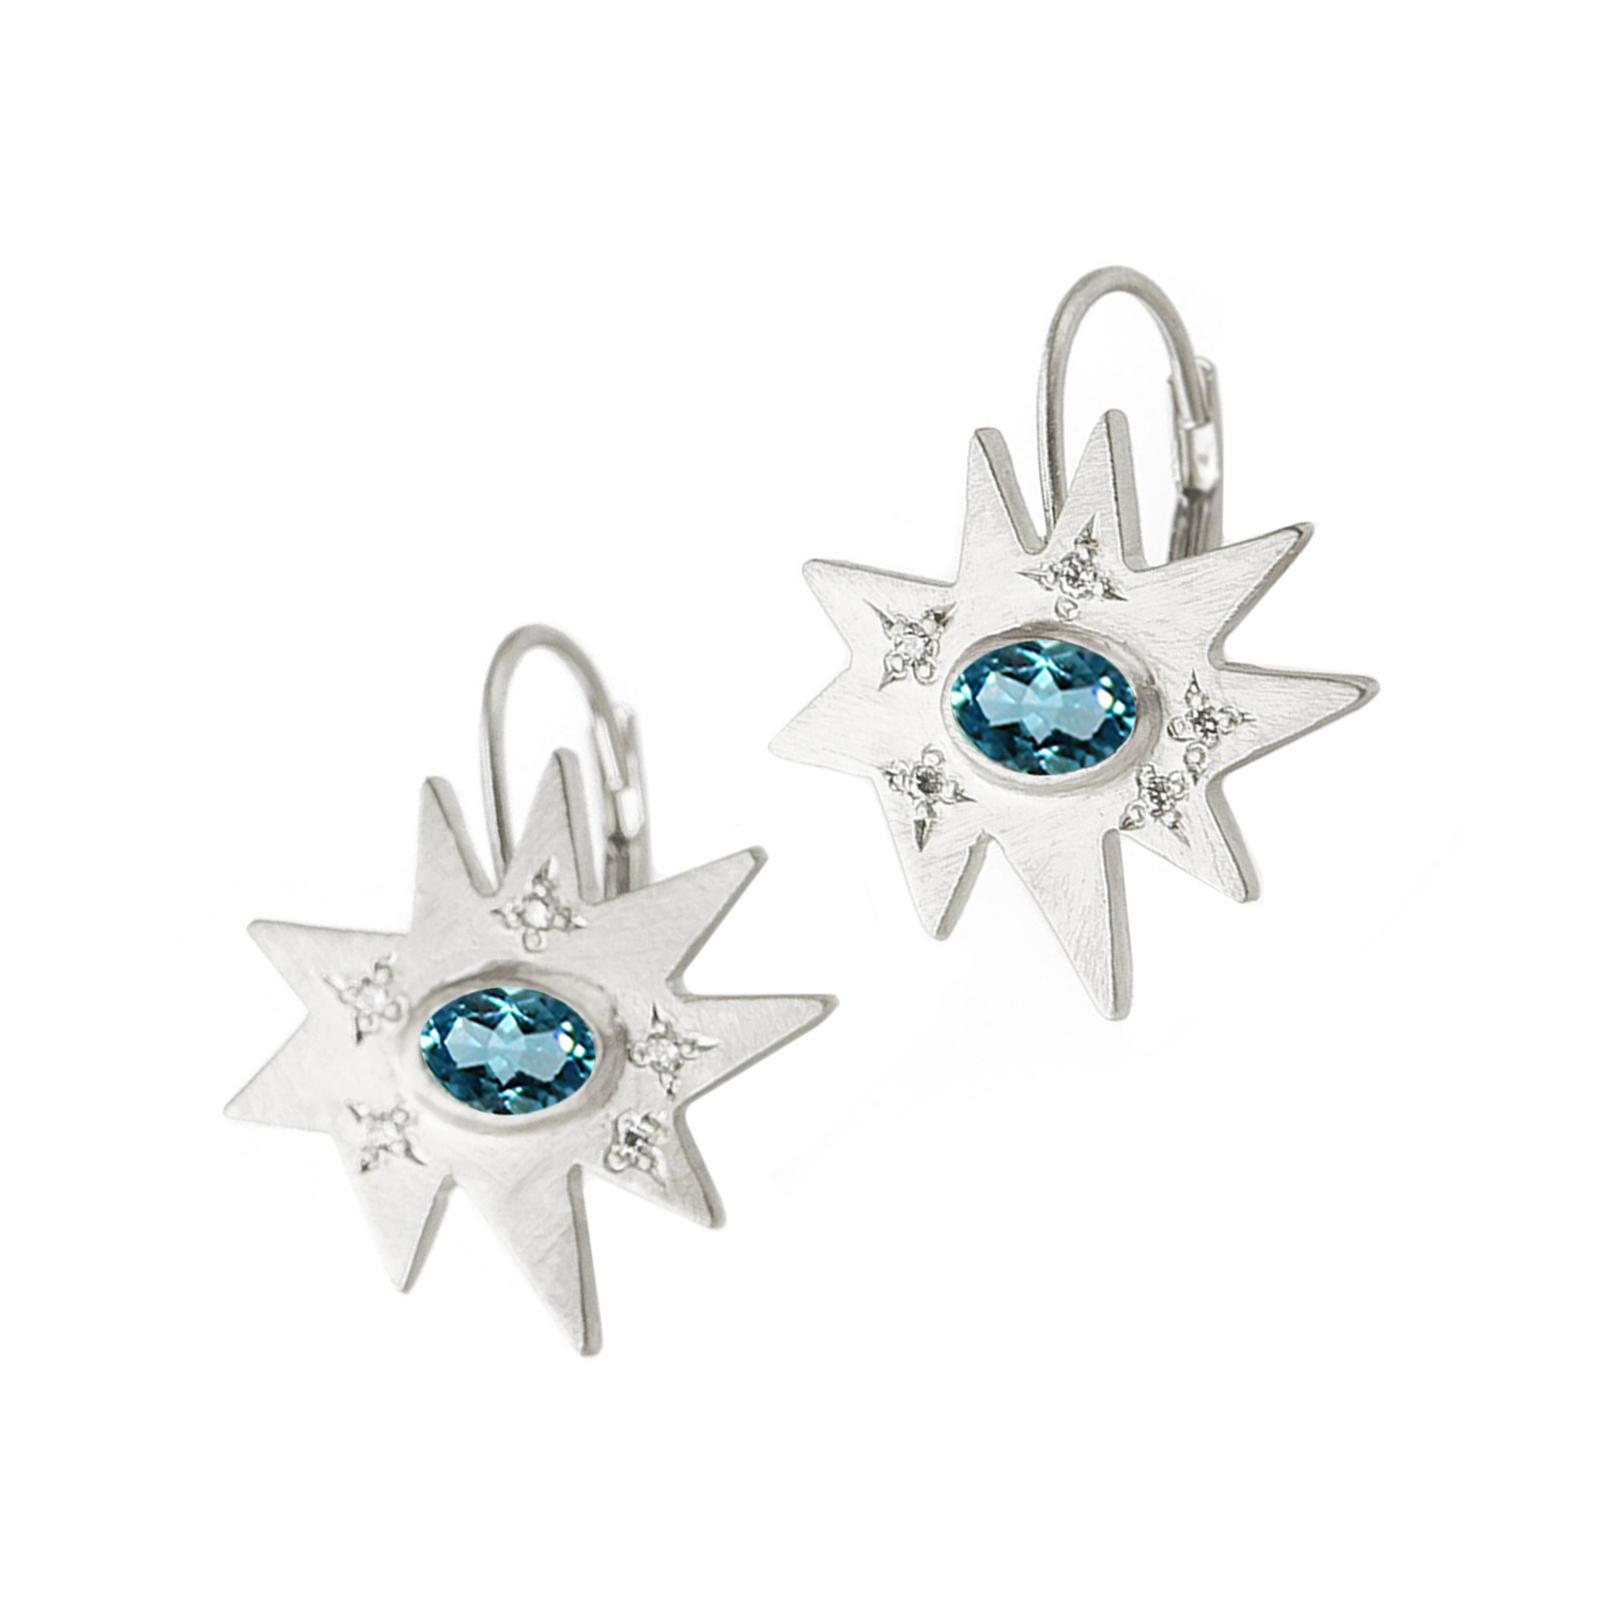 The perfect drop for any occasion. Our iconic matte sterling silver Stellina star is fixed to a lever back hook. Featuring our signature diamond dusting and a vibrant Swiss blue topaz center, this pair is full of sparkle and color.
 
Matte sterling